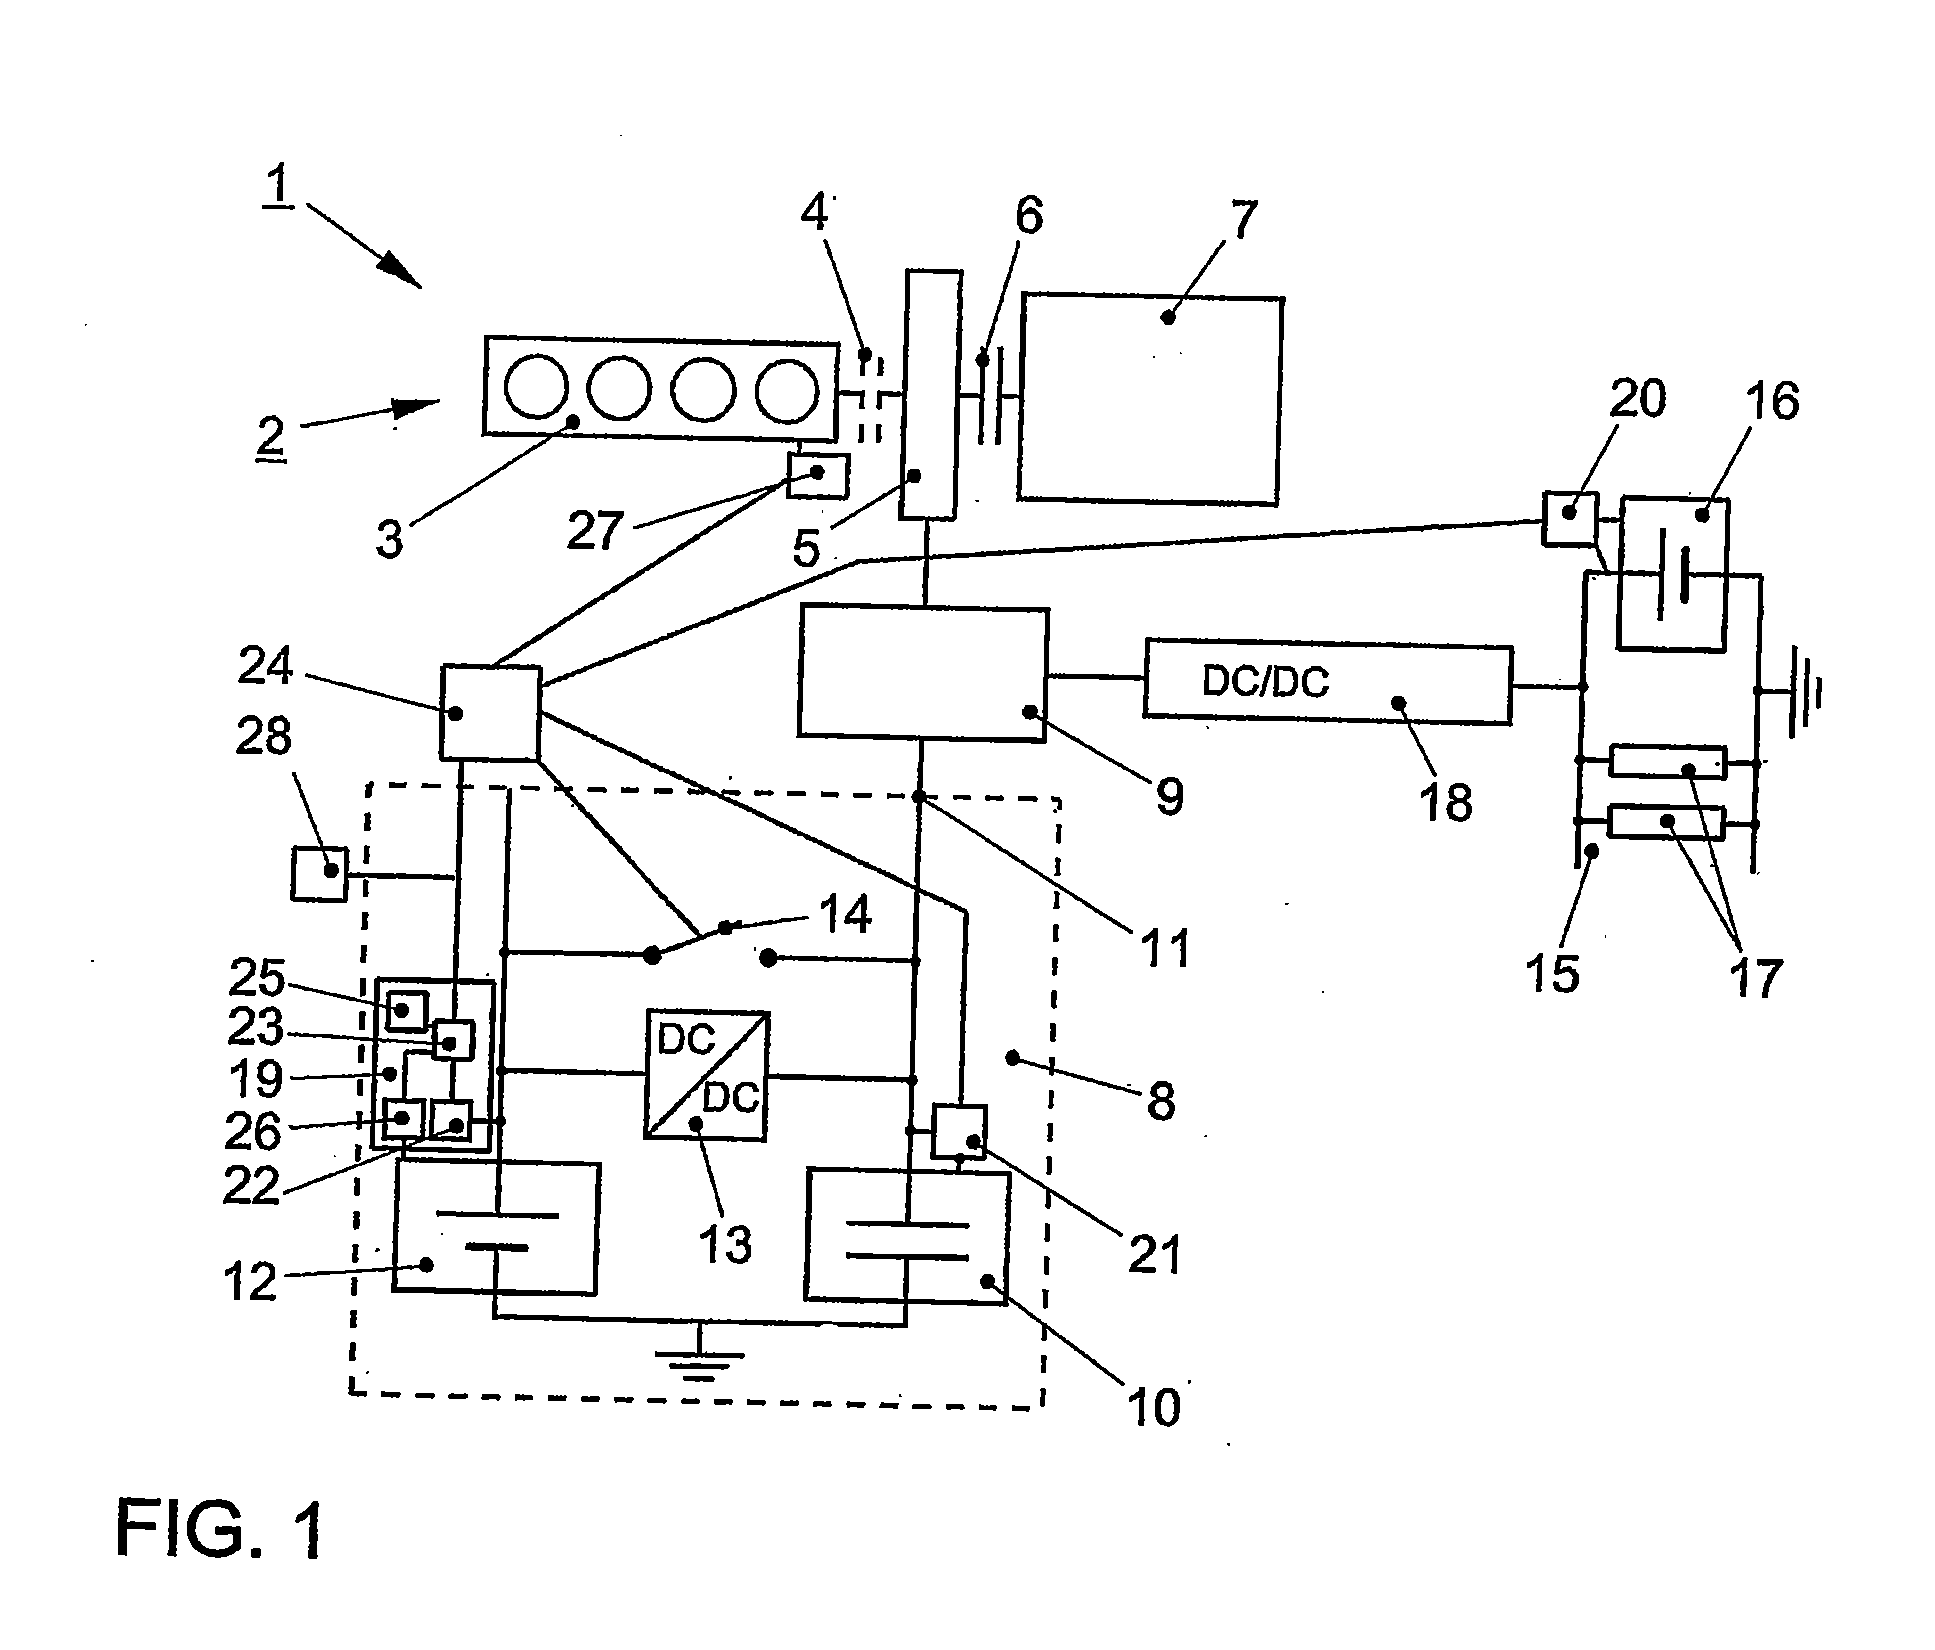 Method and Device for Determining the Charge and/or Aging State of an Energy Store